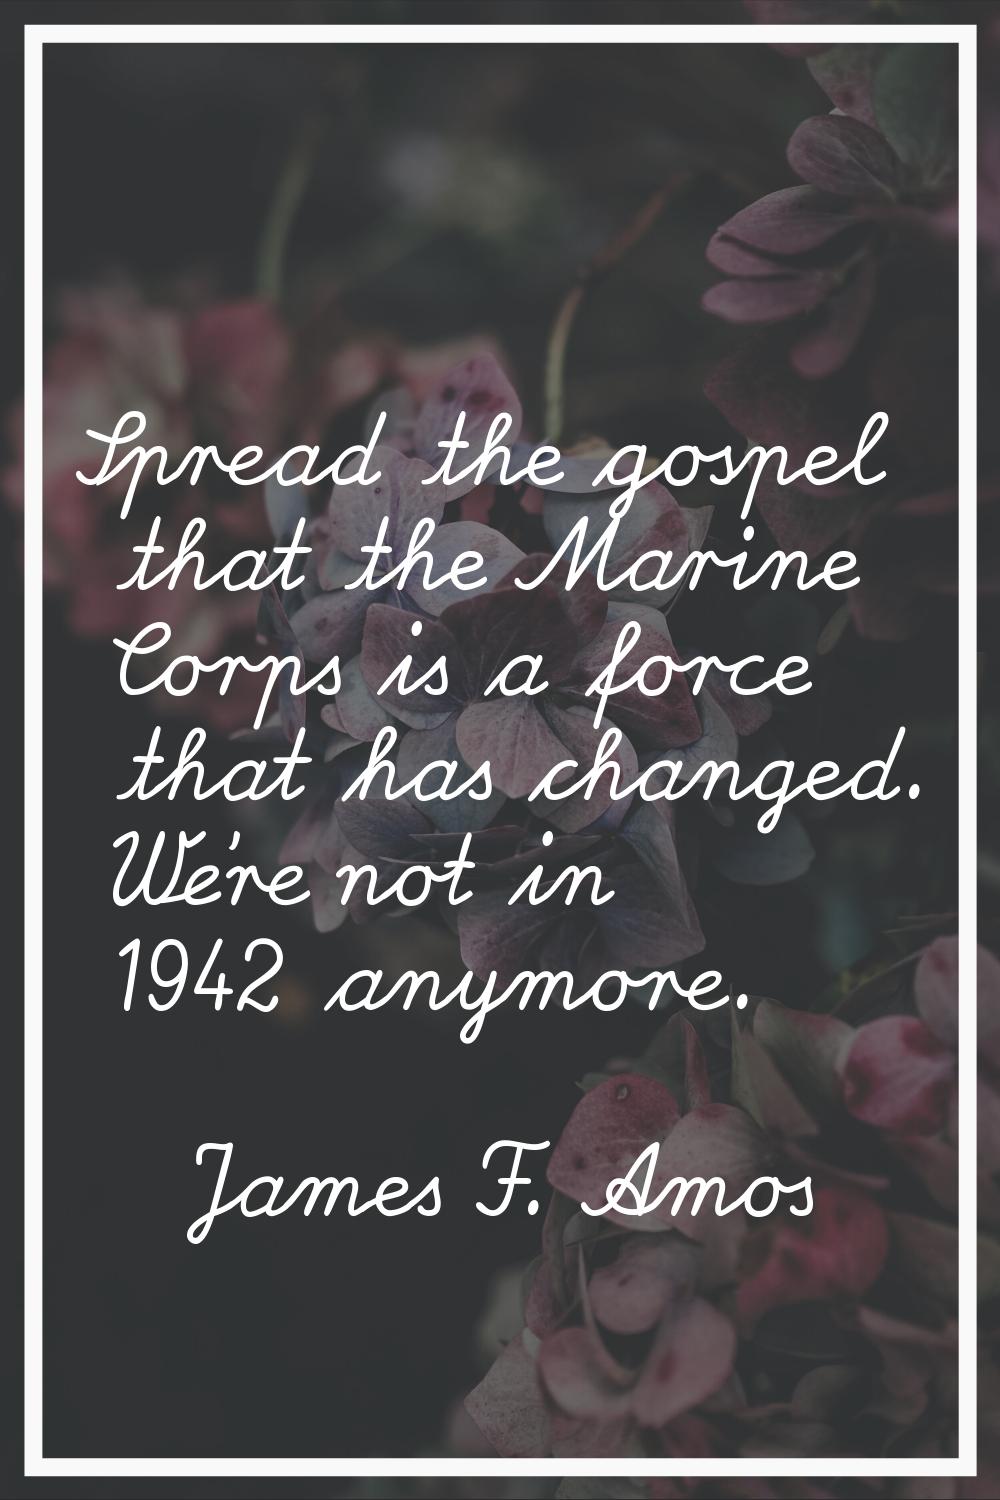 Spread the gospel that the Marine Corps is a force that has changed. We're not in 1942 anymore.